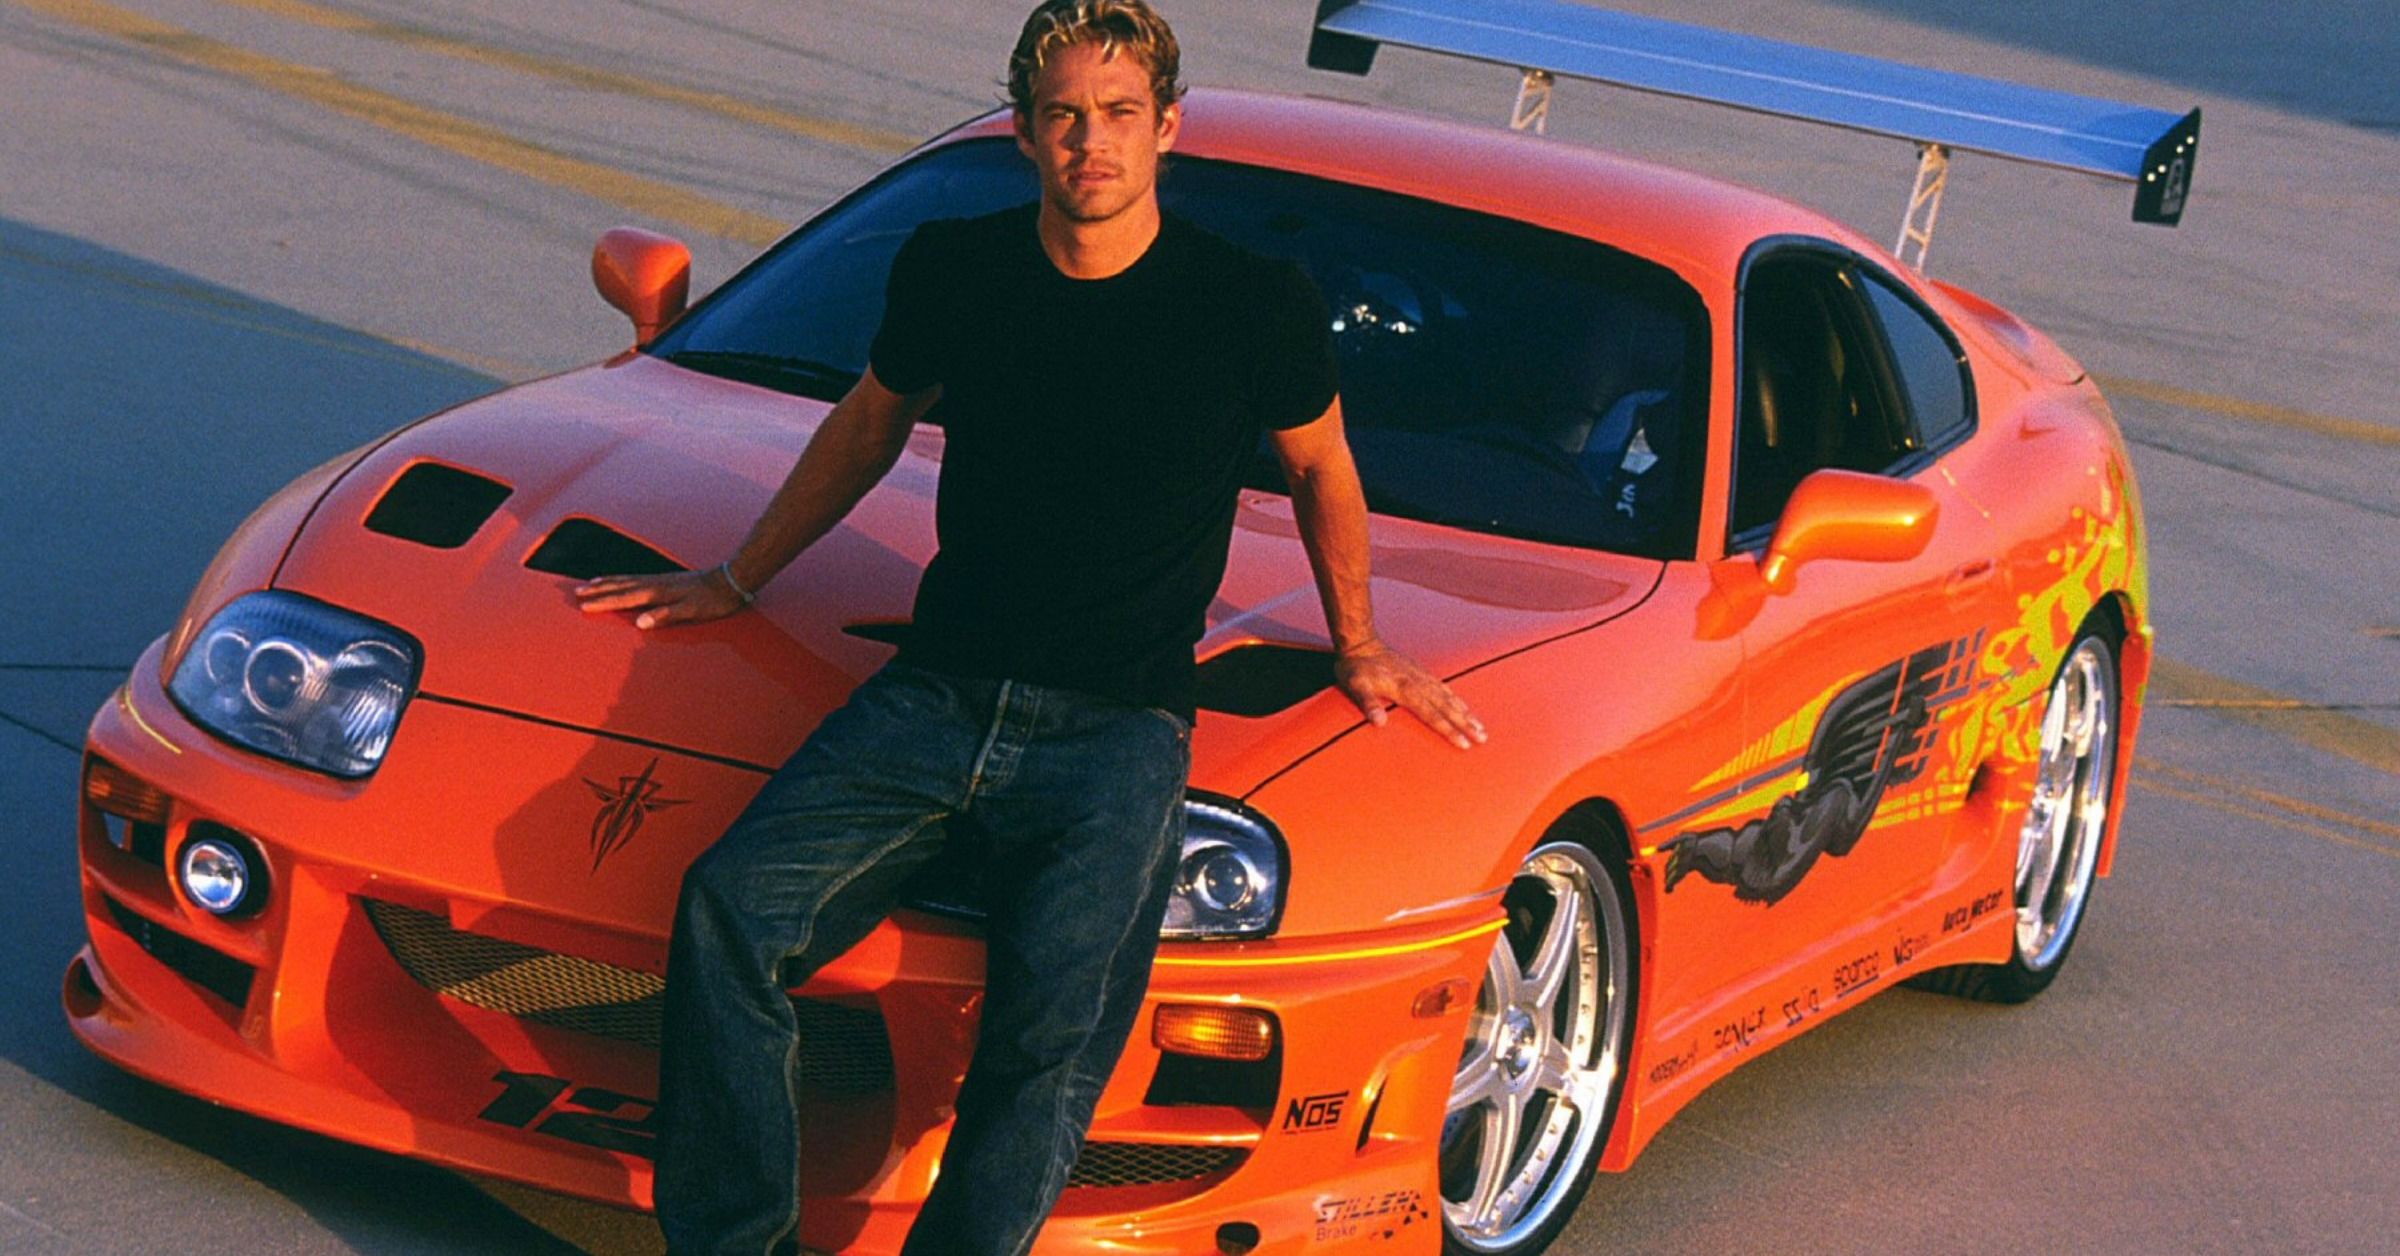 Paul Walker On Front Of Car Fast And Furious Hd Wallpaper Pxfuel | Hot ...